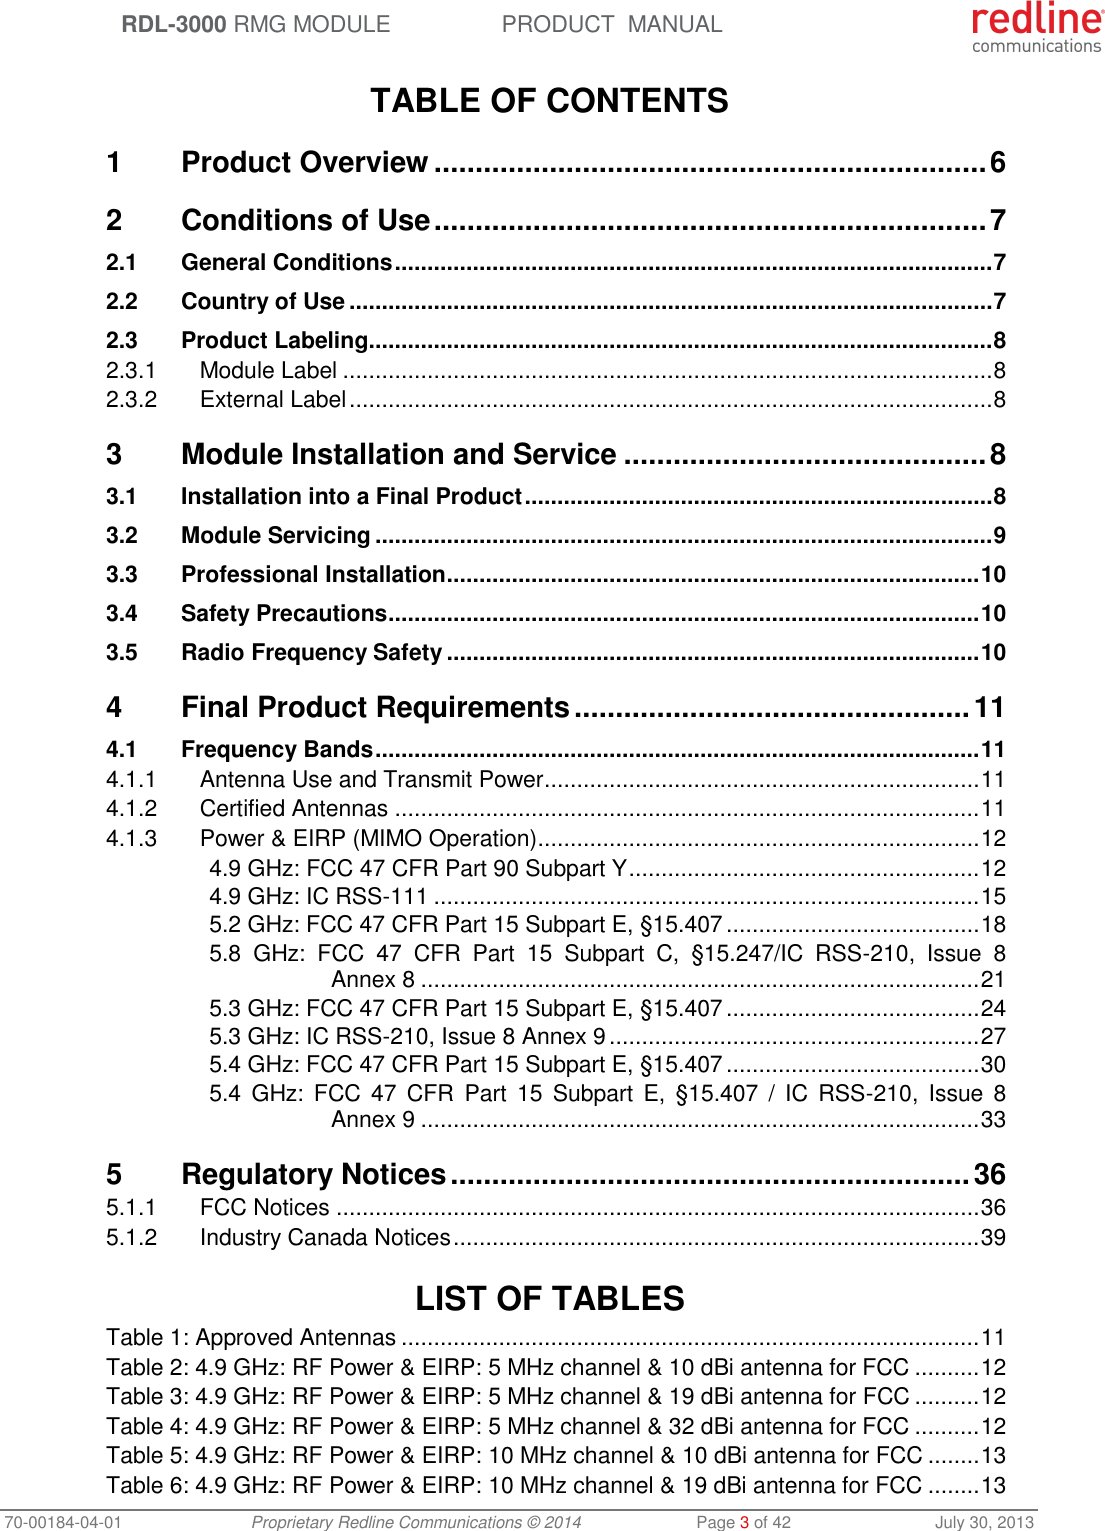  RDL-3000 RMG MODULE PRODUCT  MANUAL 70-00184-04-01 Proprietary Redline Communications © 2014  Page 3 of 42  July 30, 2013  TABLE OF CONTENTS 1 Product Overview ................................................................... 6 2 Conditions of Use ................................................................... 7 2.1 General Conditions ............................................................................................ 7 2.2 Country of Use ................................................................................................... 7 2.3 Product Labeling ................................................................................................ 8 2.3.1 Module Label .................................................................................................... 8 2.3.2 External Label ................................................................................................... 8 3 Module Installation and Service ............................................ 8 3.1 Installation into a Final Product ........................................................................ 8 3.2 Module Servicing ............................................................................................... 9 3.3 Professional Installation .................................................................................. 10 3.4 Safety Precautions ........................................................................................... 10 3.5 Radio Frequency Safety .................................................................................. 10 4 Final Product Requirements ................................................ 11 4.1 Frequency Bands ............................................................................................. 11 4.1.1 Antenna Use and Transmit Power ................................................................... 11 4.1.2 Certified Antennas .......................................................................................... 11 4.1.3 Power &amp; EIRP (MIMO Operation) .................................................................... 12 4.9 GHz: FCC 47 CFR Part 90 Subpart Y ...................................................... 12 4.9 GHz: IC RSS-111 .................................................................................... 15 5.2 GHz: FCC 47 CFR Part 15 Subpart E, §15.407 ....................................... 18 5.8  GHz:  FCC  47  CFR  Part  15  Subpart  C,  §15.247/IC  RSS-210,  Issue  8 Annex 8 ...................................................................................... 21 5.3 GHz: FCC 47 CFR Part 15 Subpart E, §15.407 ....................................... 24 5.3 GHz: IC RSS-210, Issue 8 Annex 9 ......................................................... 27 5.4 GHz: FCC 47 CFR Part 15 Subpart E, §15.407 ....................................... 30 5.4  GHz:  FCC 47 CFR  Part  15  Subpart  E,  §15.407  /  IC  RSS-210,  Issue  8 Annex 9 ...................................................................................... 33 5 Regulatory Notices ............................................................... 36 5.1.1 FCC Notices ................................................................................................... 36 5.1.2 Industry Canada Notices ................................................................................. 39   LIST OF TABLES Table 1: Approved Antennas ......................................................................................... 11 Table 2: 4.9 GHz: RF Power &amp; EIRP: 5 MHz channel &amp; 10 dBi antenna for FCC .......... 12 Table 3: 4.9 GHz: RF Power &amp; EIRP: 5 MHz channel &amp; 19 dBi antenna for FCC .......... 12 Table 4: 4.9 GHz: RF Power &amp; EIRP: 5 MHz channel &amp; 32 dBi antenna for FCC .......... 12 Table 5: 4.9 GHz: RF Power &amp; EIRP: 10 MHz channel &amp; 10 dBi antenna for FCC ........ 13 Table 6: 4.9 GHz: RF Power &amp; EIRP: 10 MHz channel &amp; 19 dBi antenna for FCC ........ 13 